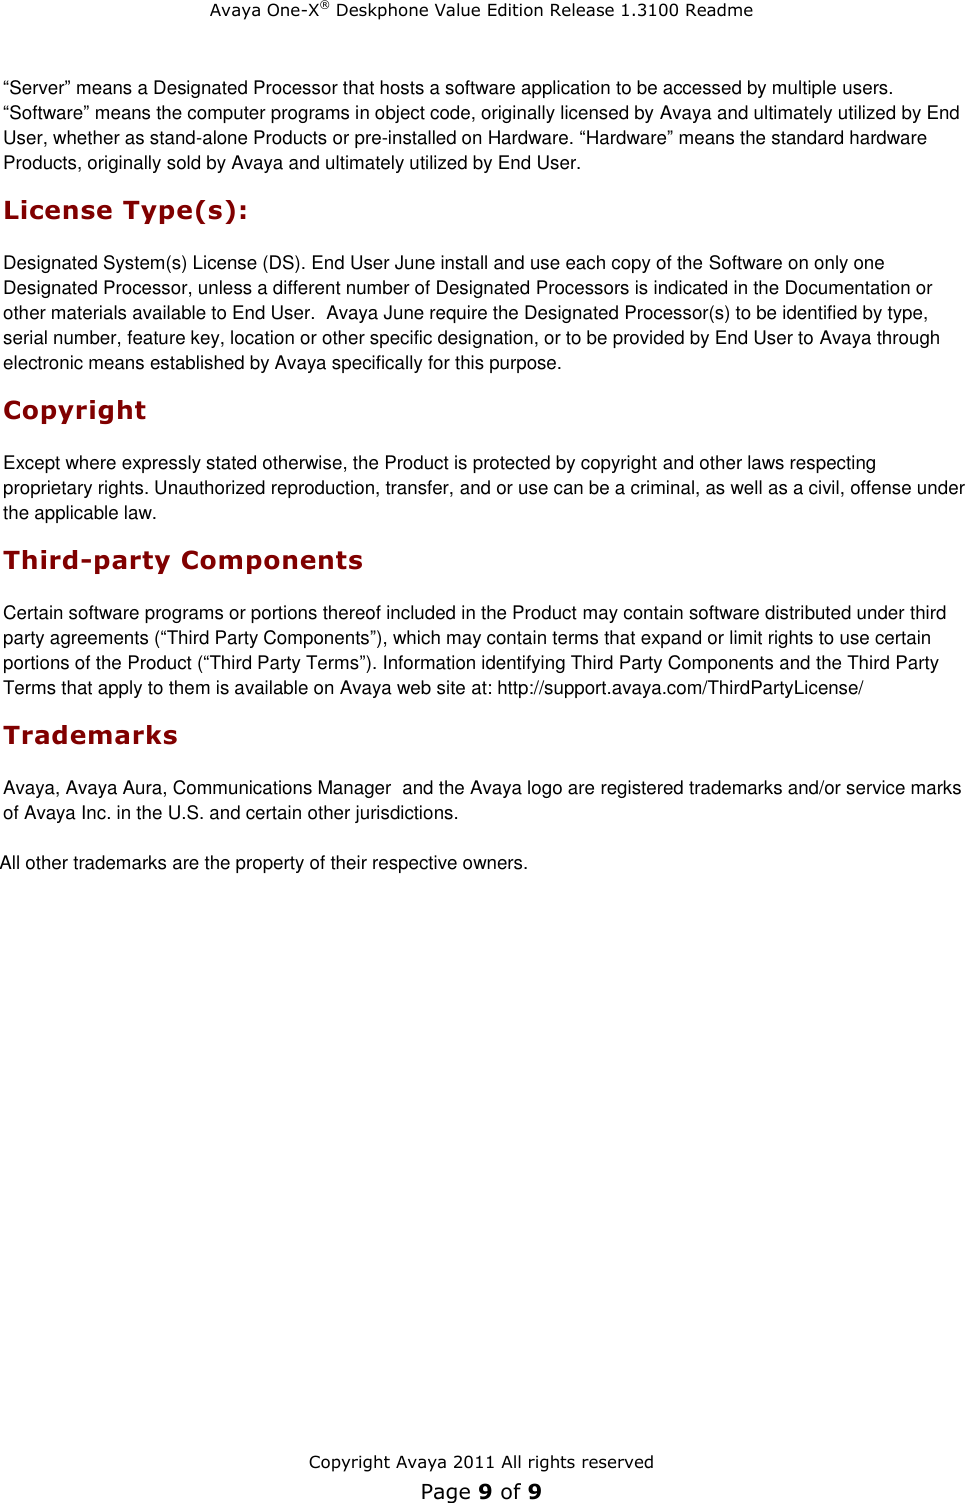 Page 9 of 9 - Avaya Avaya-1600-Series-H323-3-Service-Pack-1-Users-Manual- H.323 Release 1.3100 Readme  Avaya-1600-series-h323-3-service-pack-1-users-manual